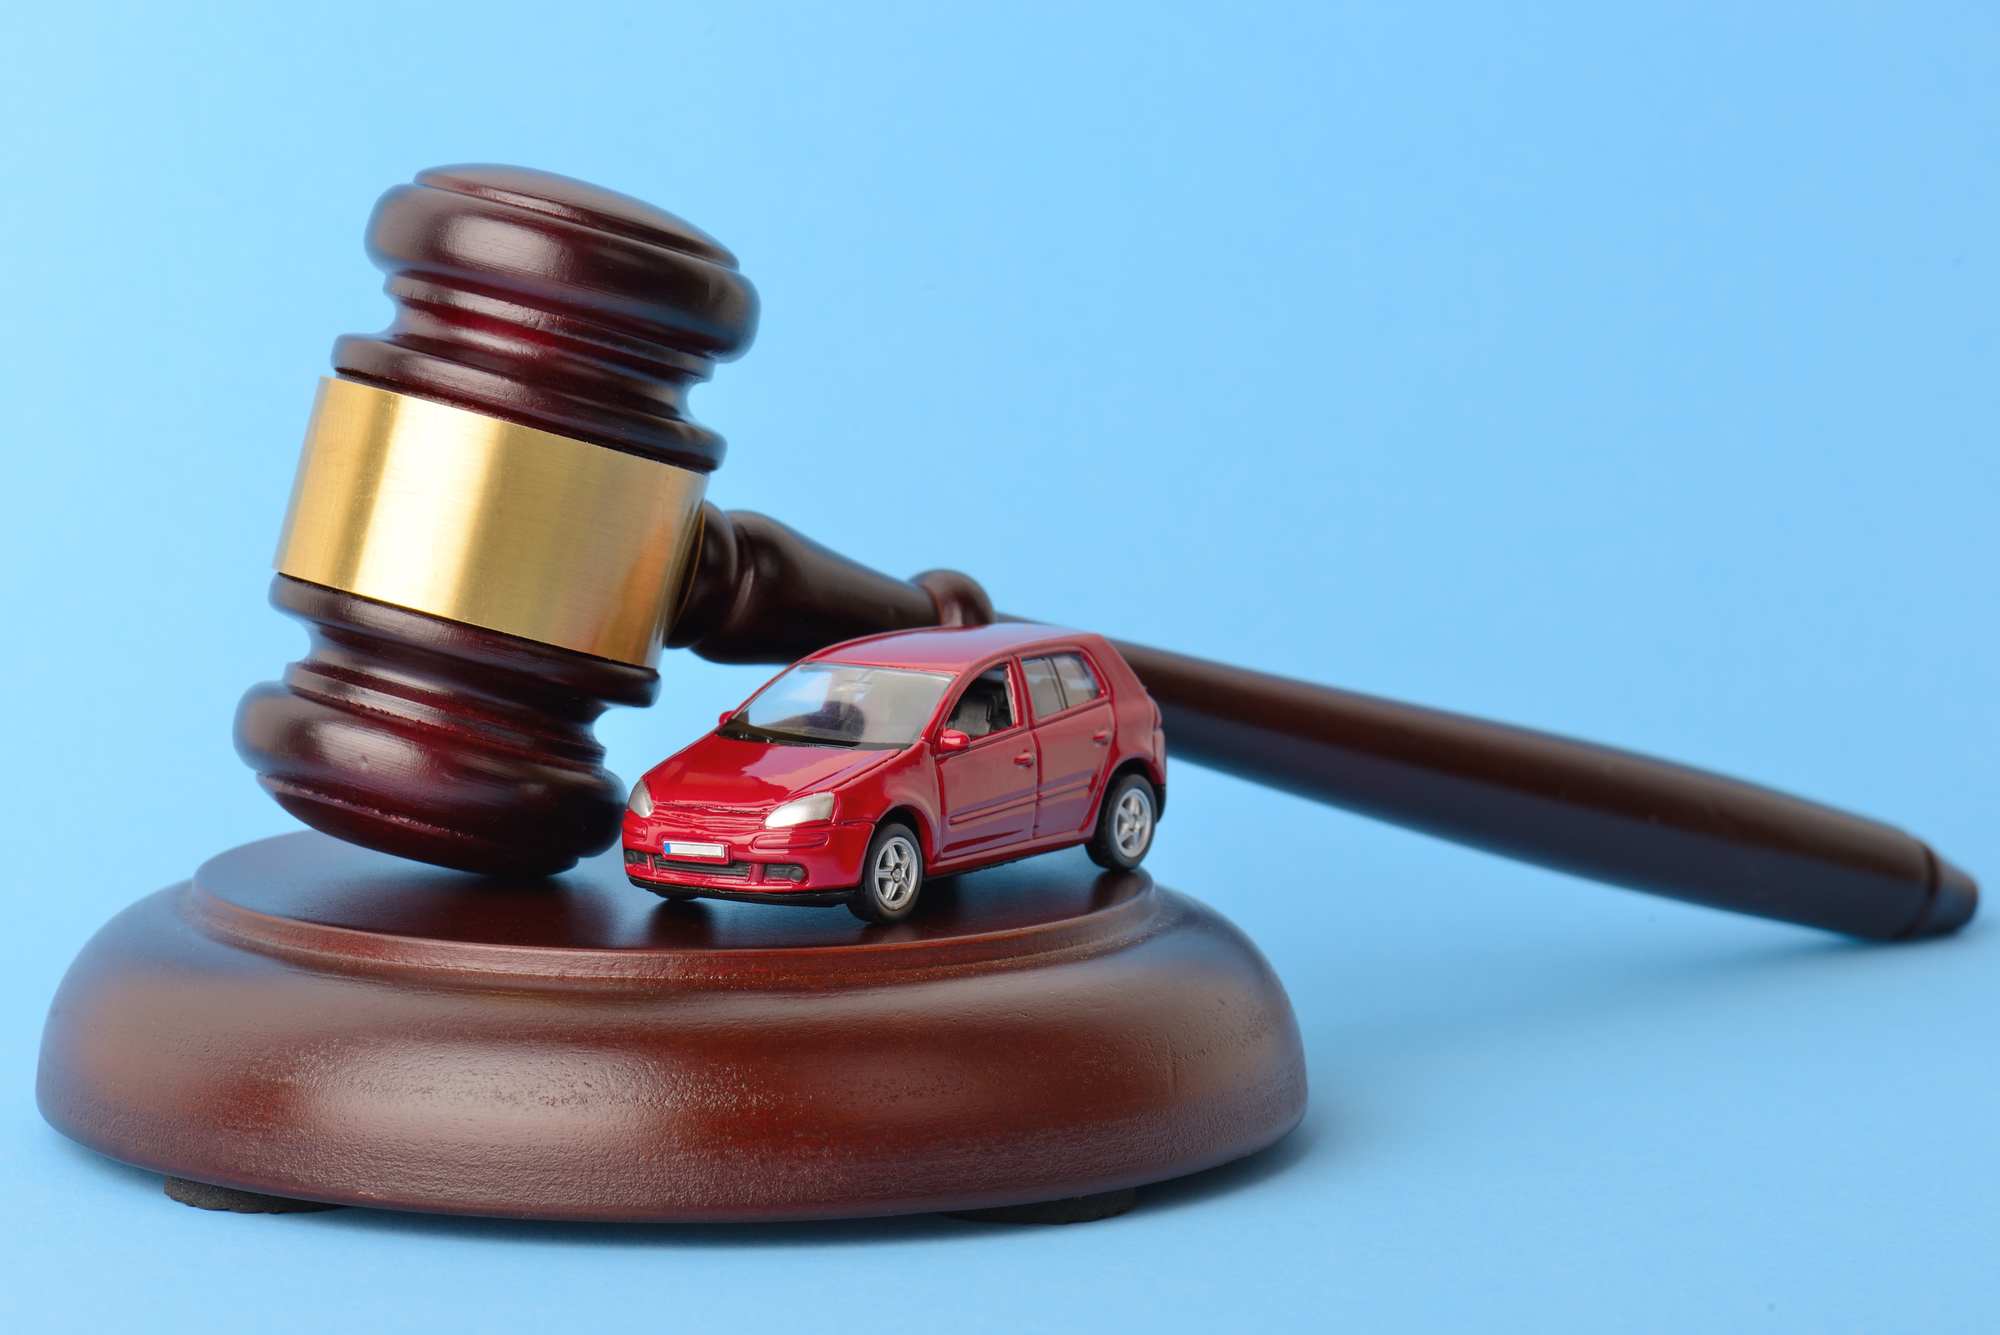  motor vehicle accident attorney reviews near me 